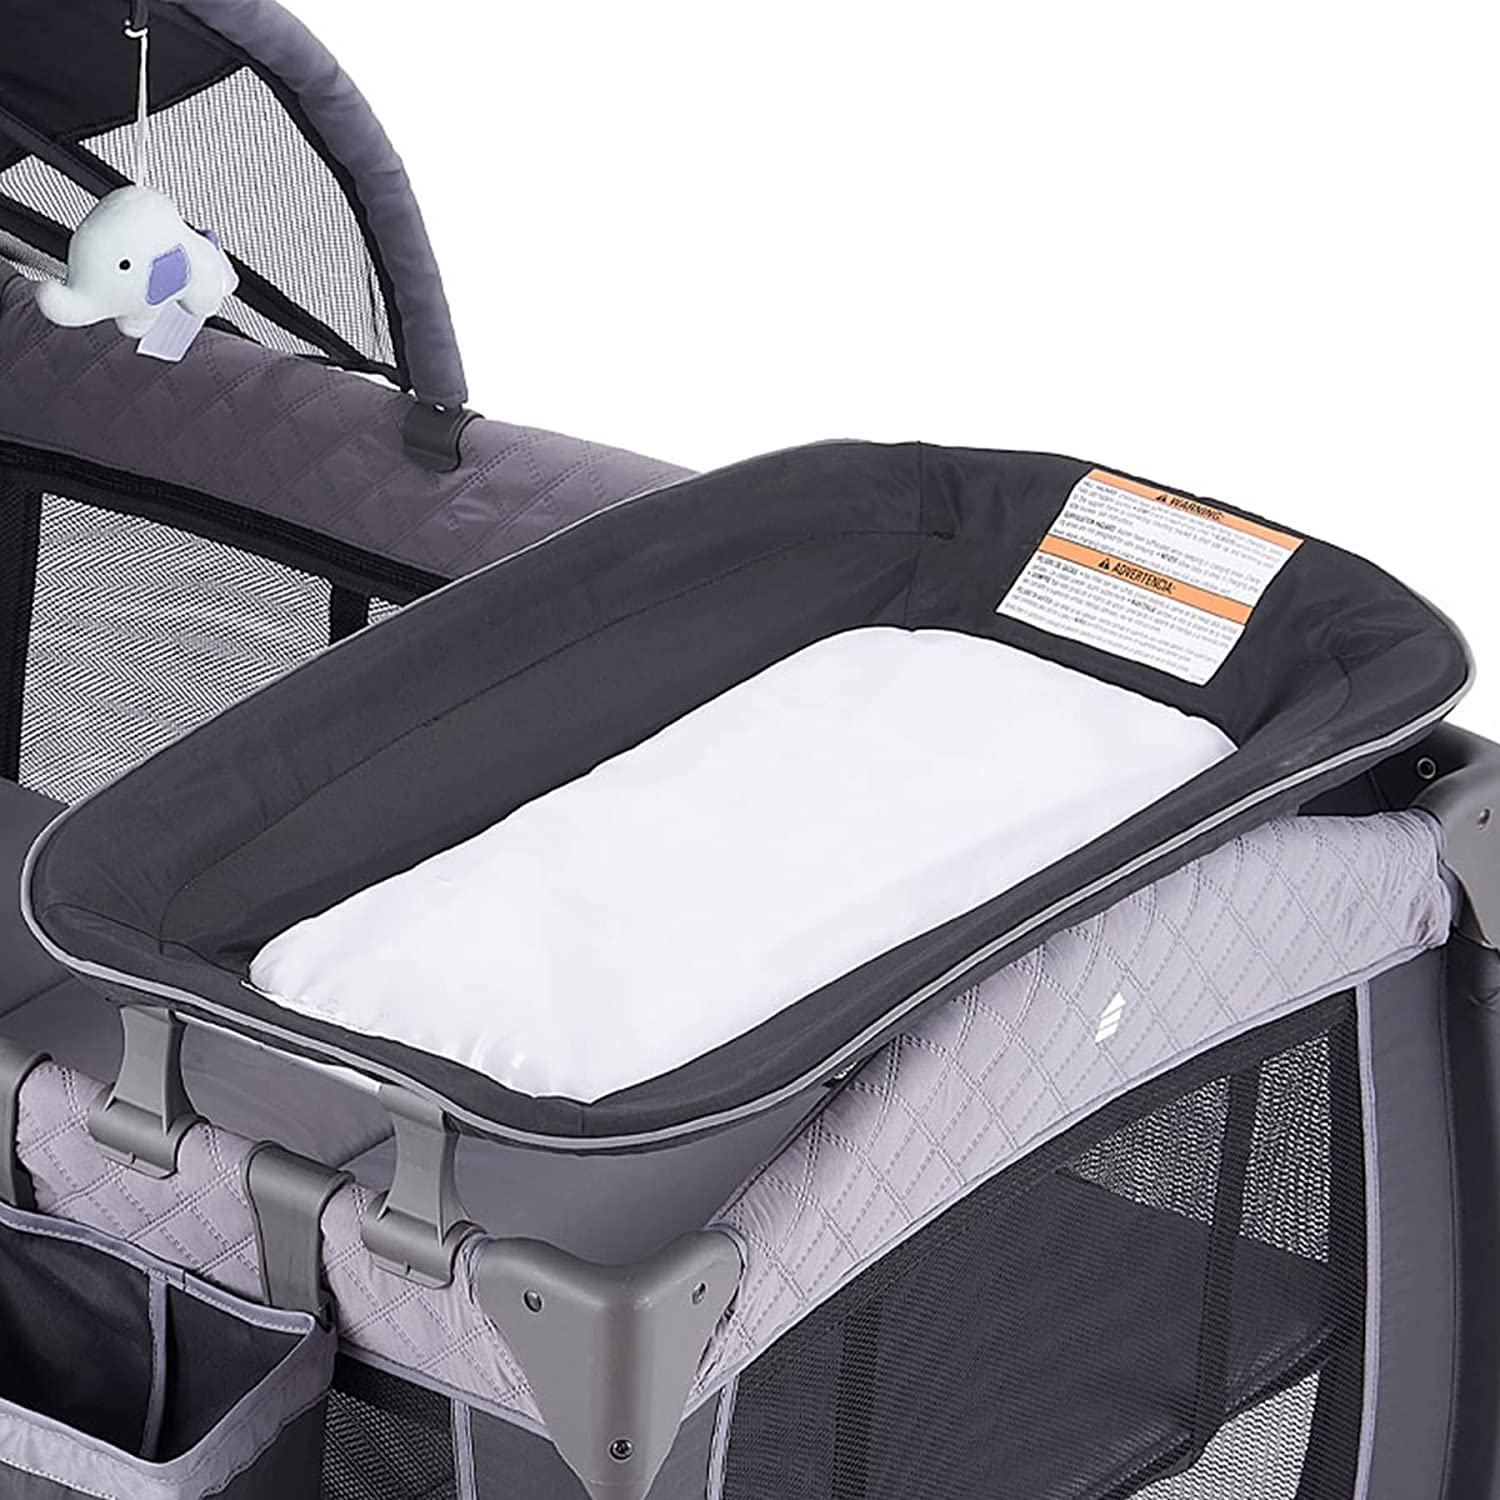 Pamo Babe Unisex Portable Baby Play Yard Include Wheels, Canopy, Changing Table for Newborn(Grey) - image 3 of 13